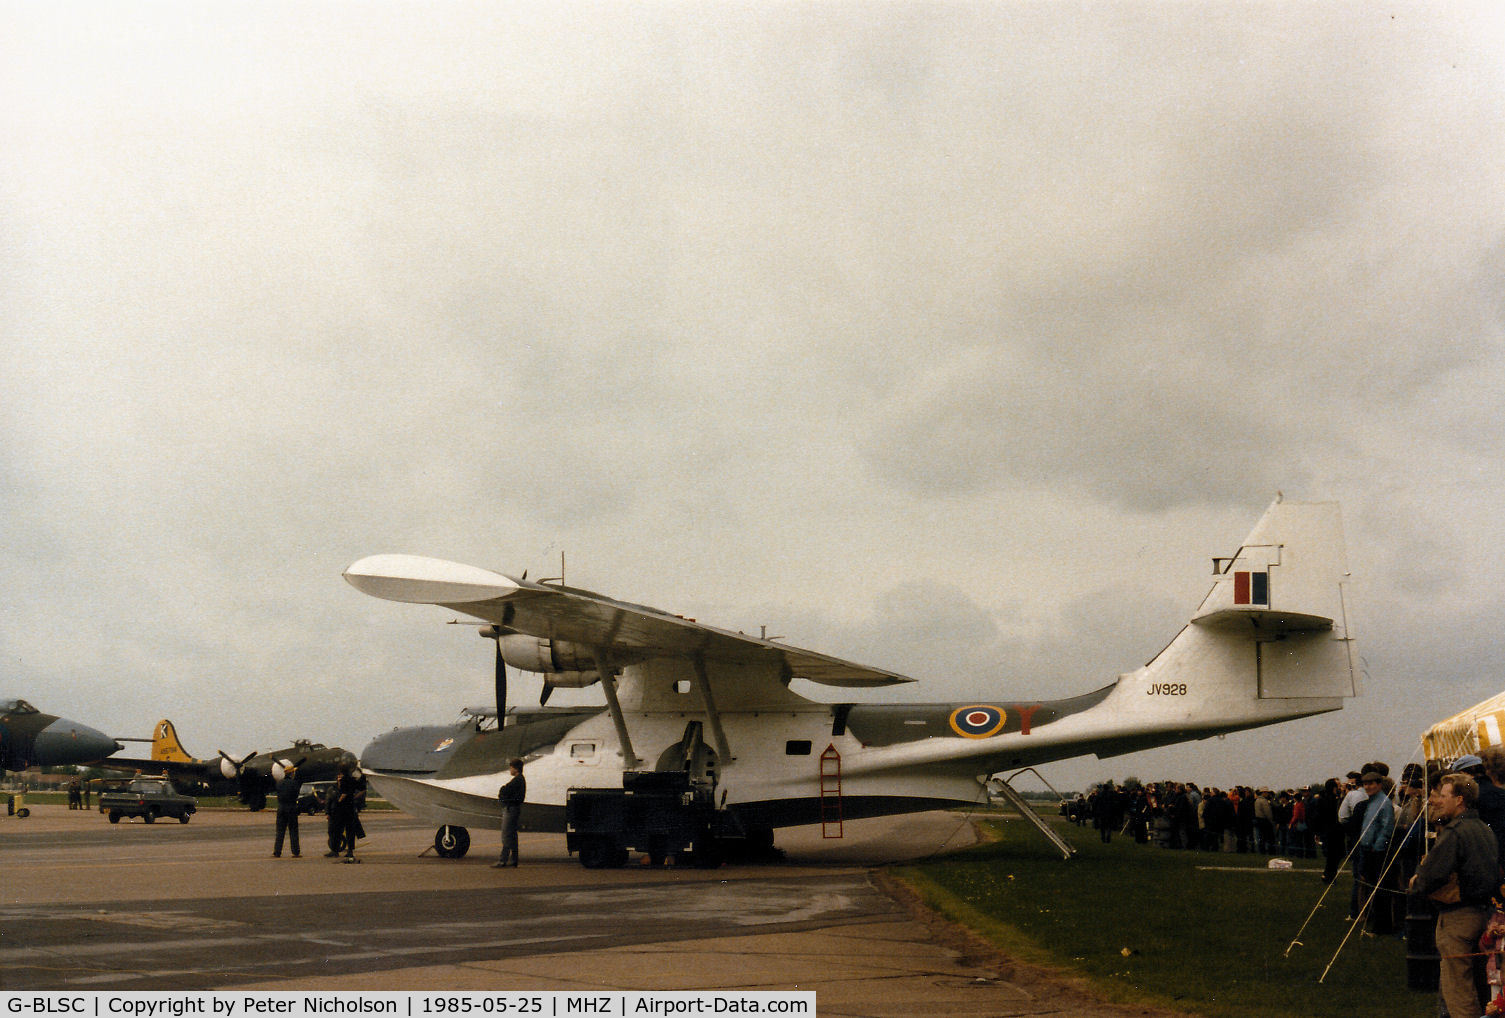 G-BLSC, 1944 Consolidated PBY-5A Catalina C/N 1997, PBY-5A Catalina JV928 on display at the 1985 RAF Mildenhall Air Fete.